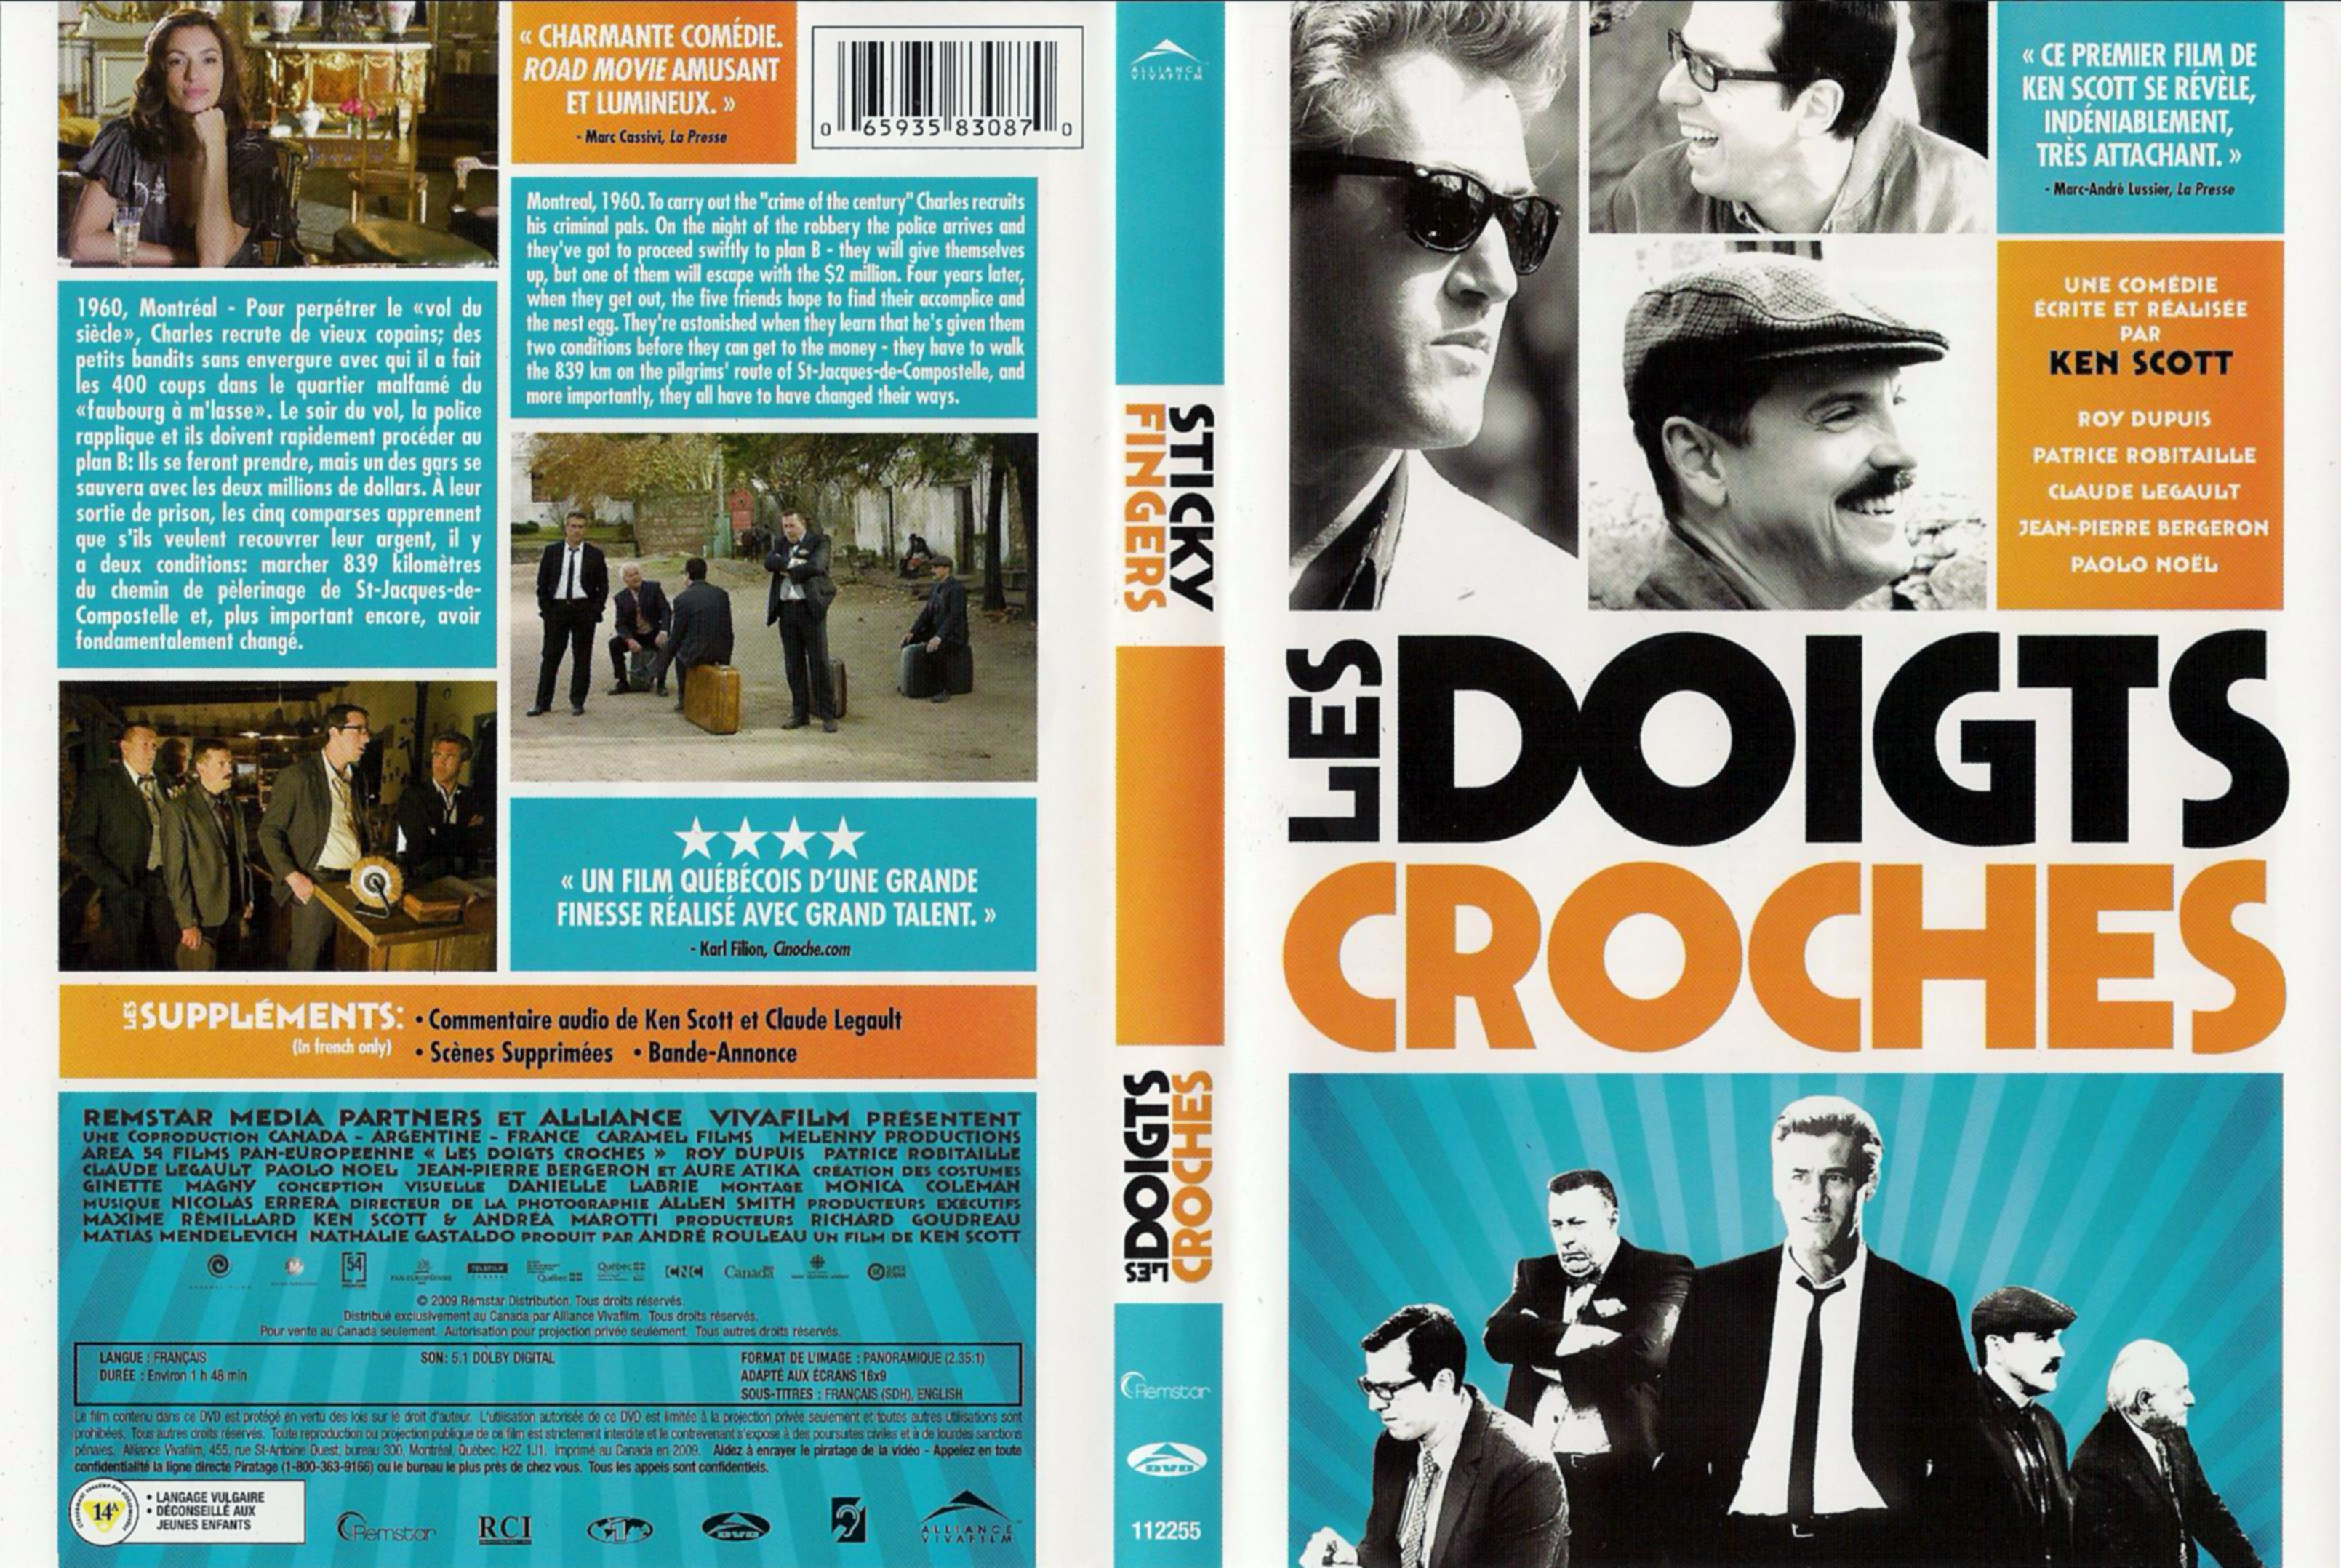 Jaquette DVD Les doigts croches (Canadienne)